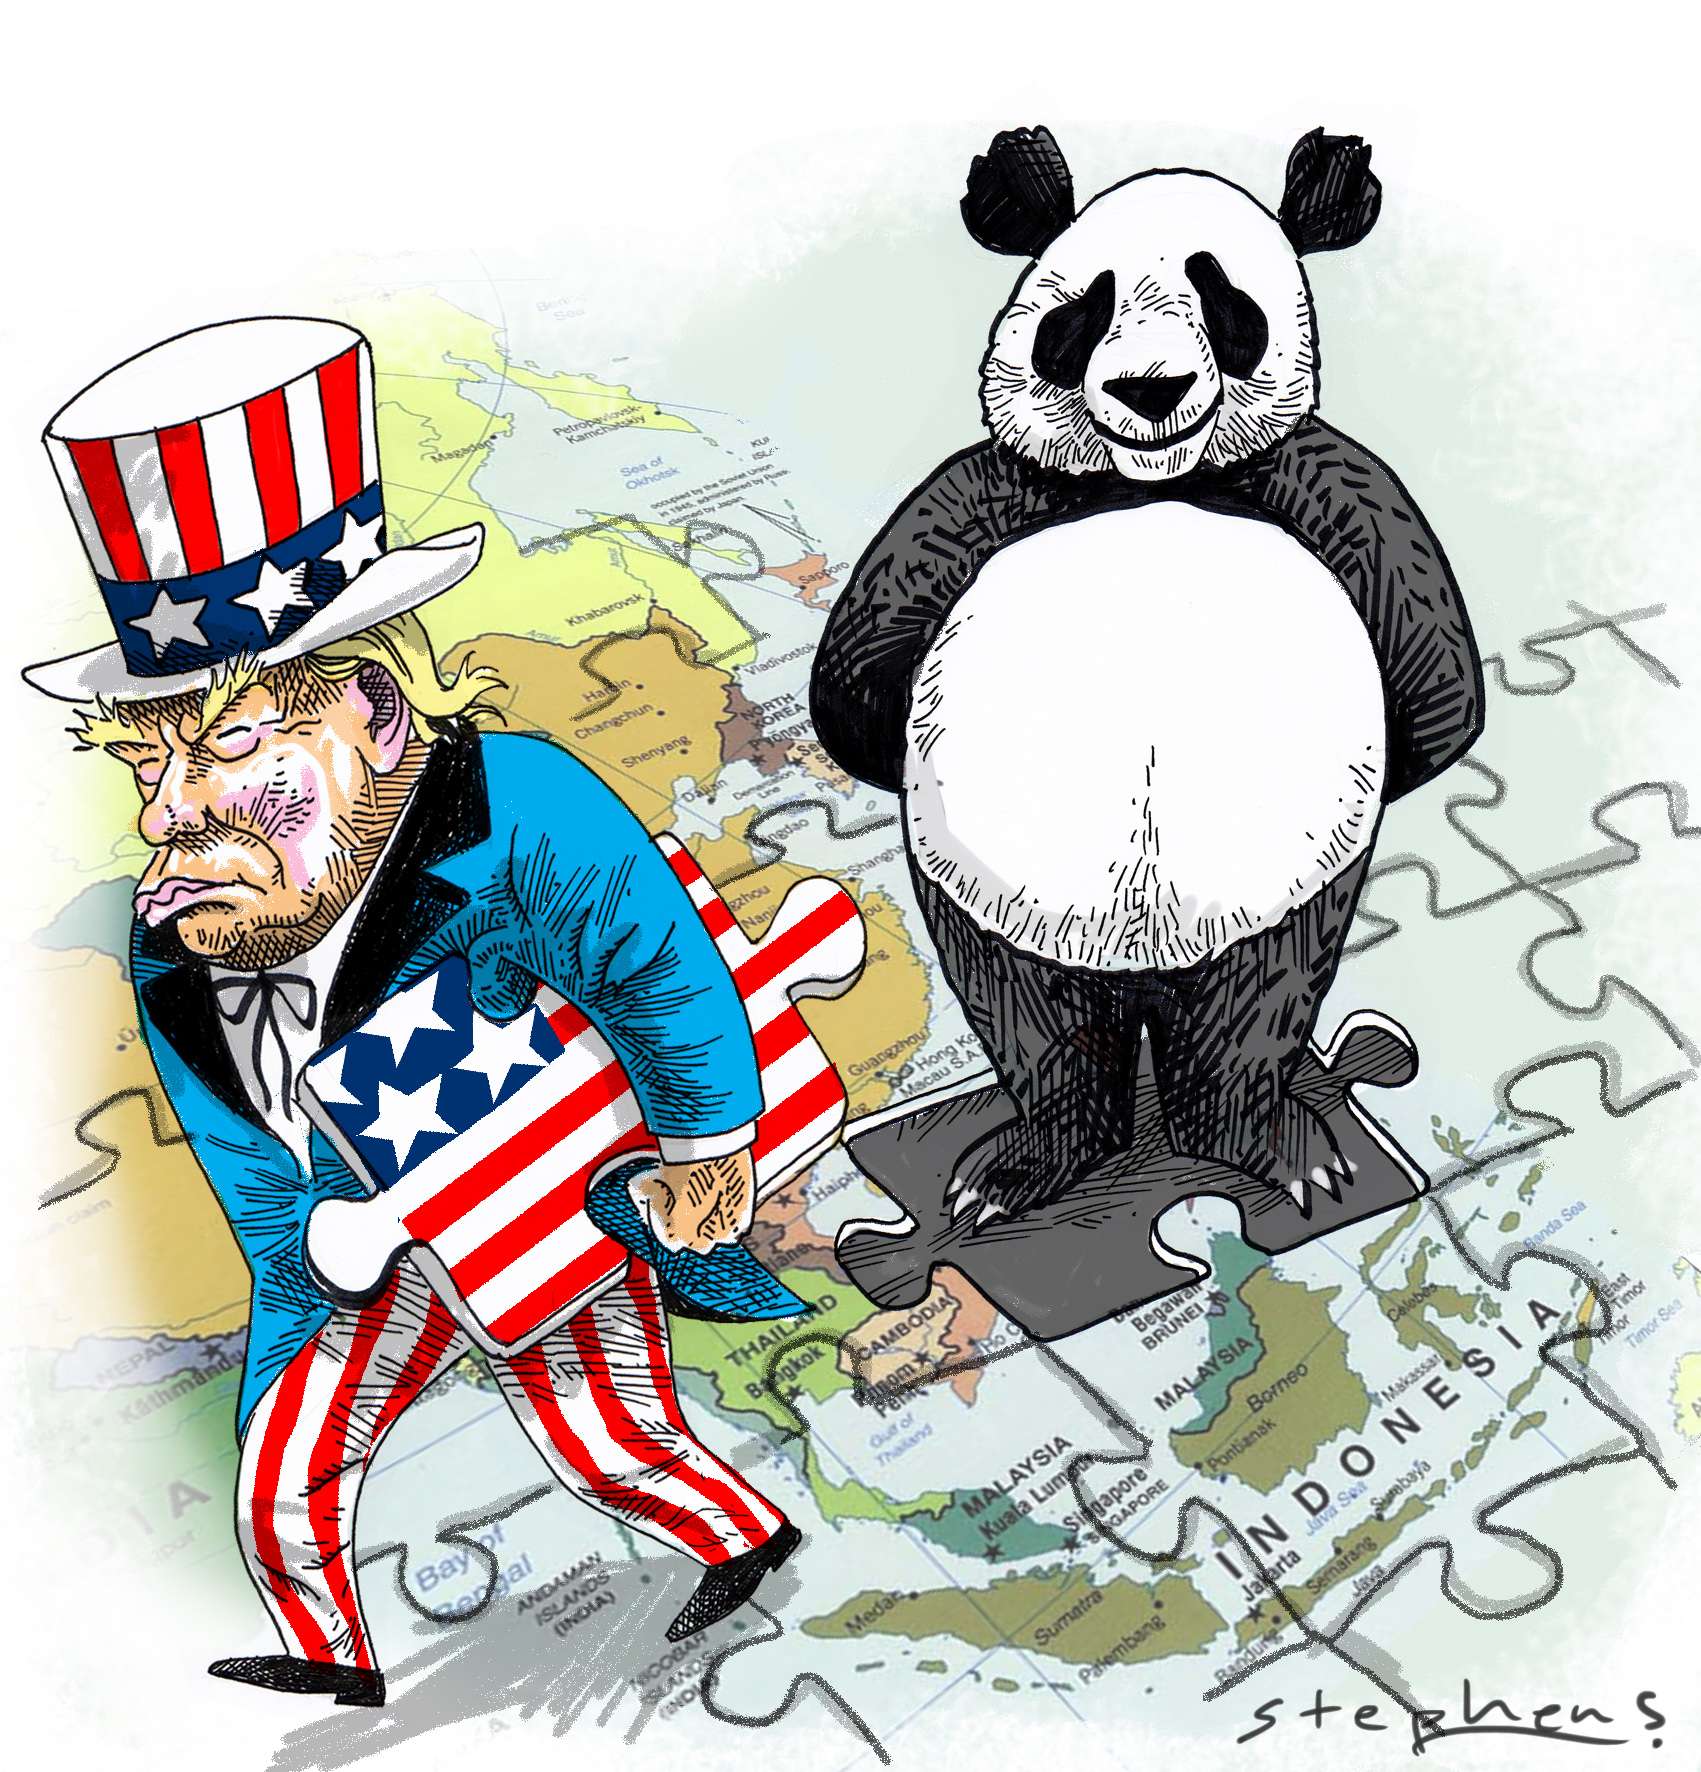 David Shambaugh says with the Trump administration seemingly withdrawing its attention from Asia – to the unease of the region’s smaller nations – China will be the one to benefit. But can Beijing seize the day?